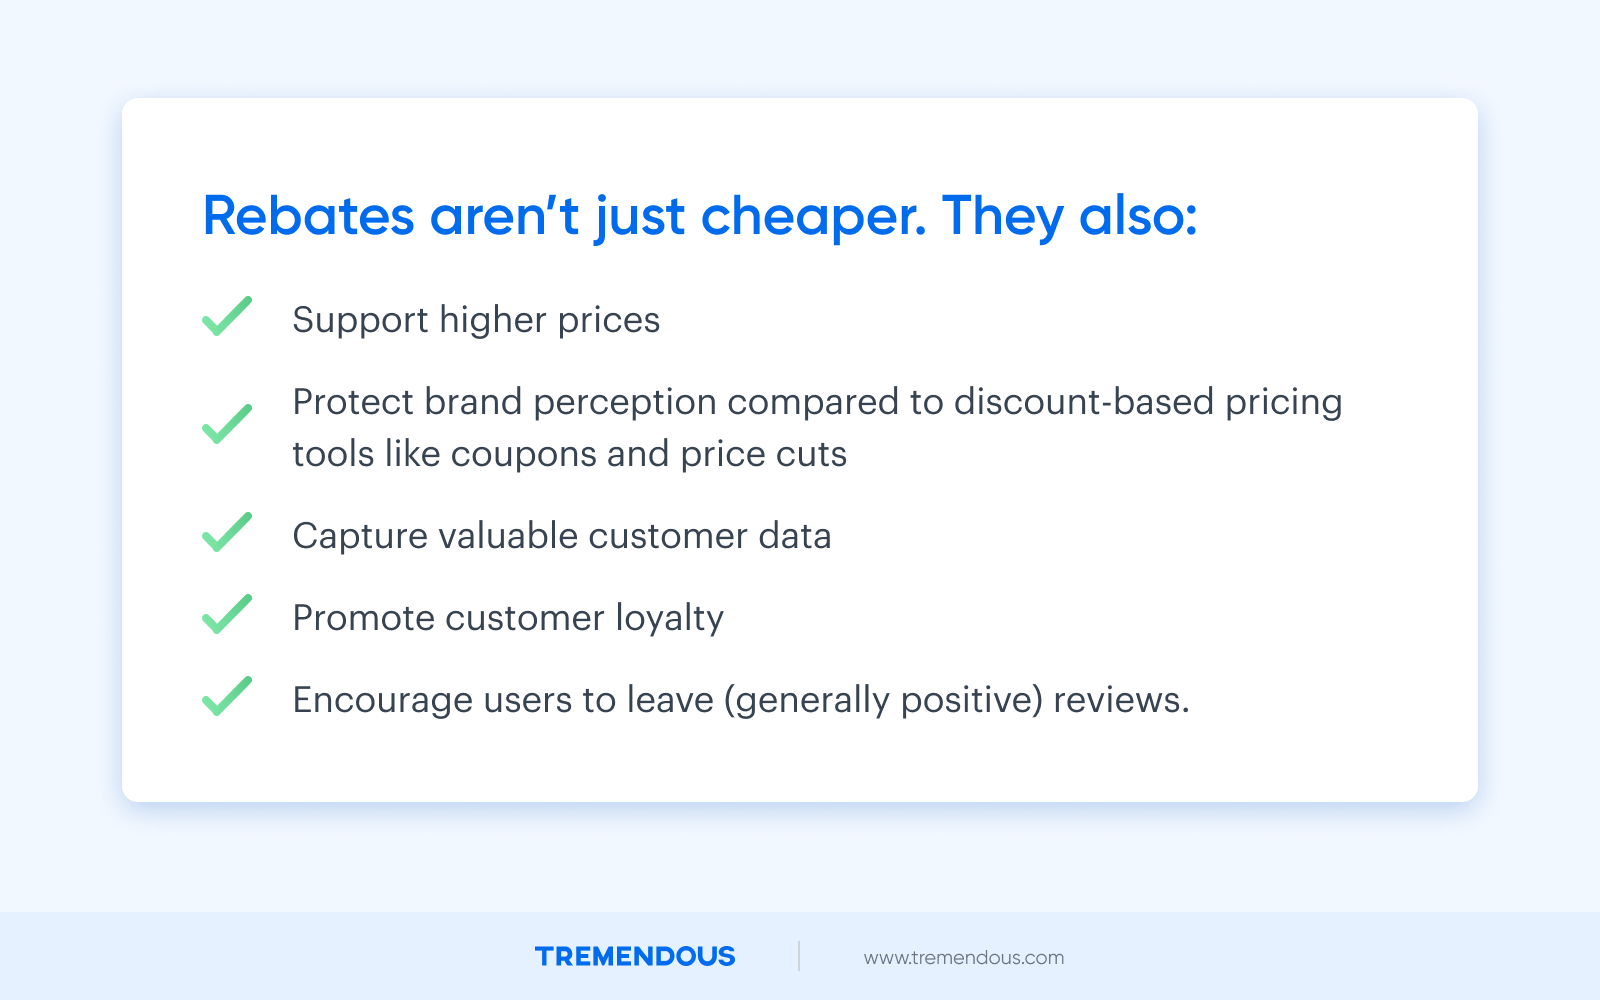 Text that reads: rebates aren't just cheaper. They also: support higher prices, protect brand perception compared to discount-based pricing tools like coupons and price cuts, capture valuable customer data, promote customer loyalty, and encourage users to leave (generally positive) reviews.